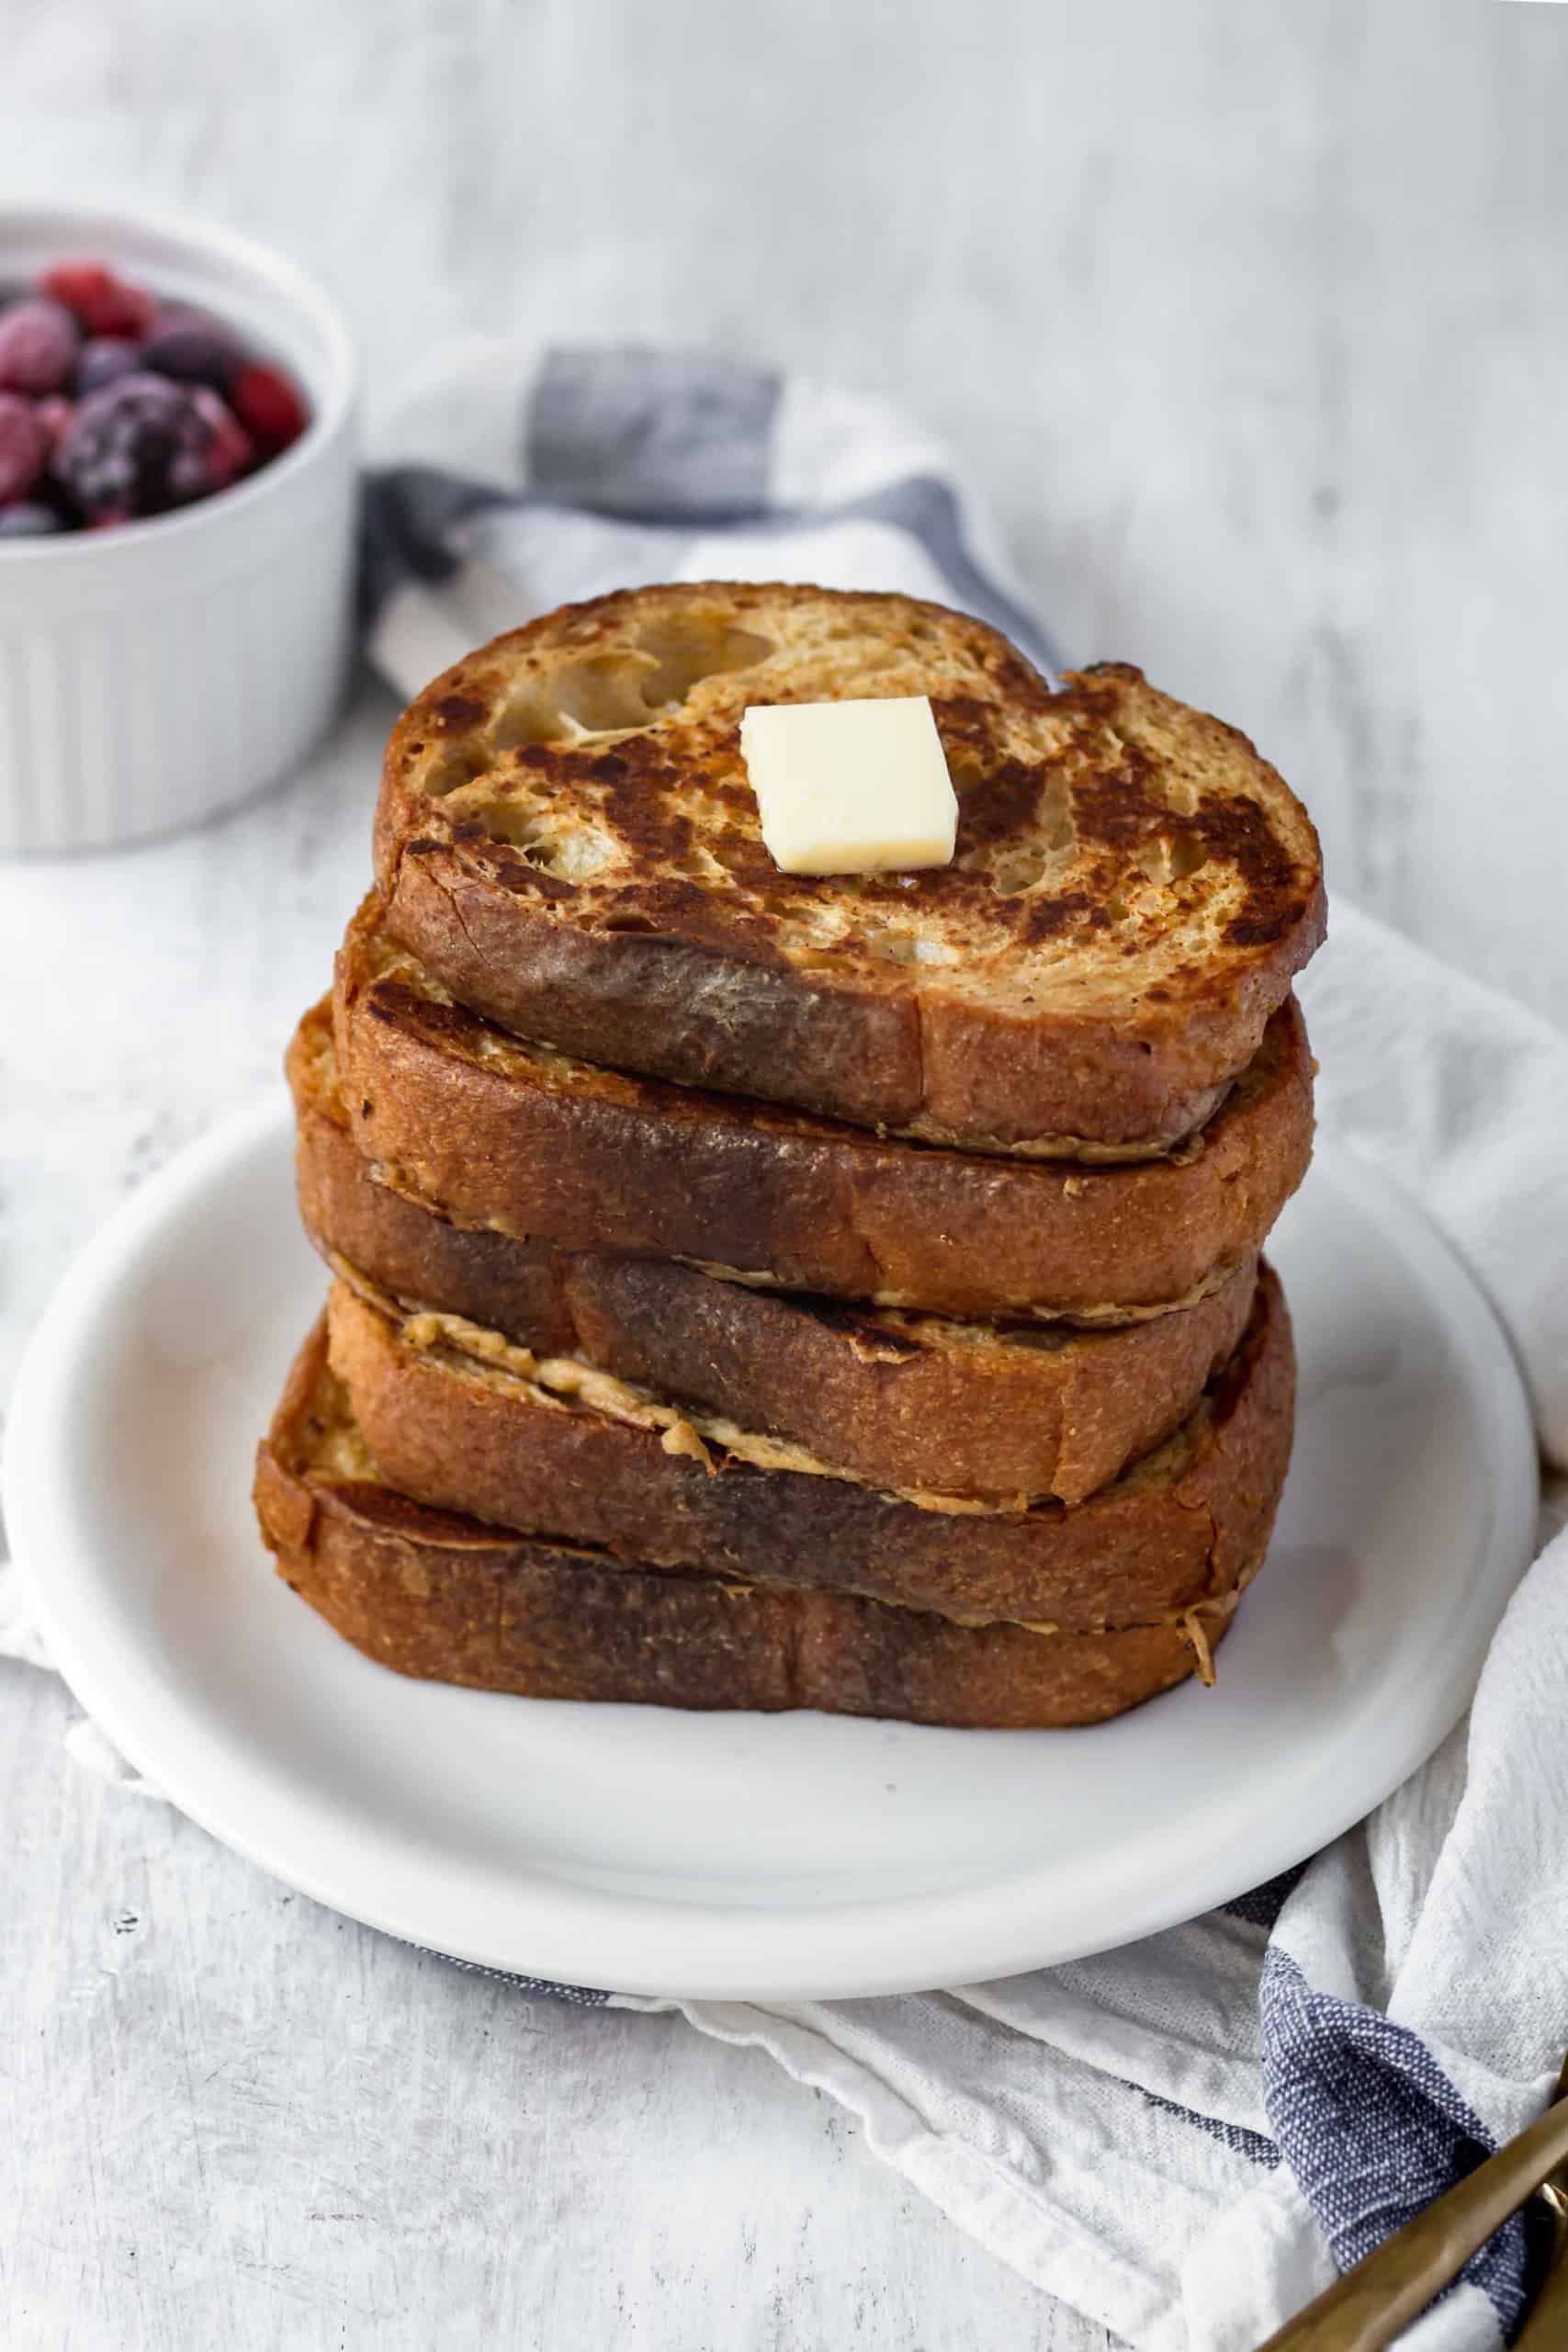 Vegan french toast is easy to make and shockingly delicious! Made with coconut milk and chickpea flour, it's perfect for breakfast or brunch! #veganfrenchtoast #veganbreakfast #veganbrunch #plantbasedmeals #frenchtoast